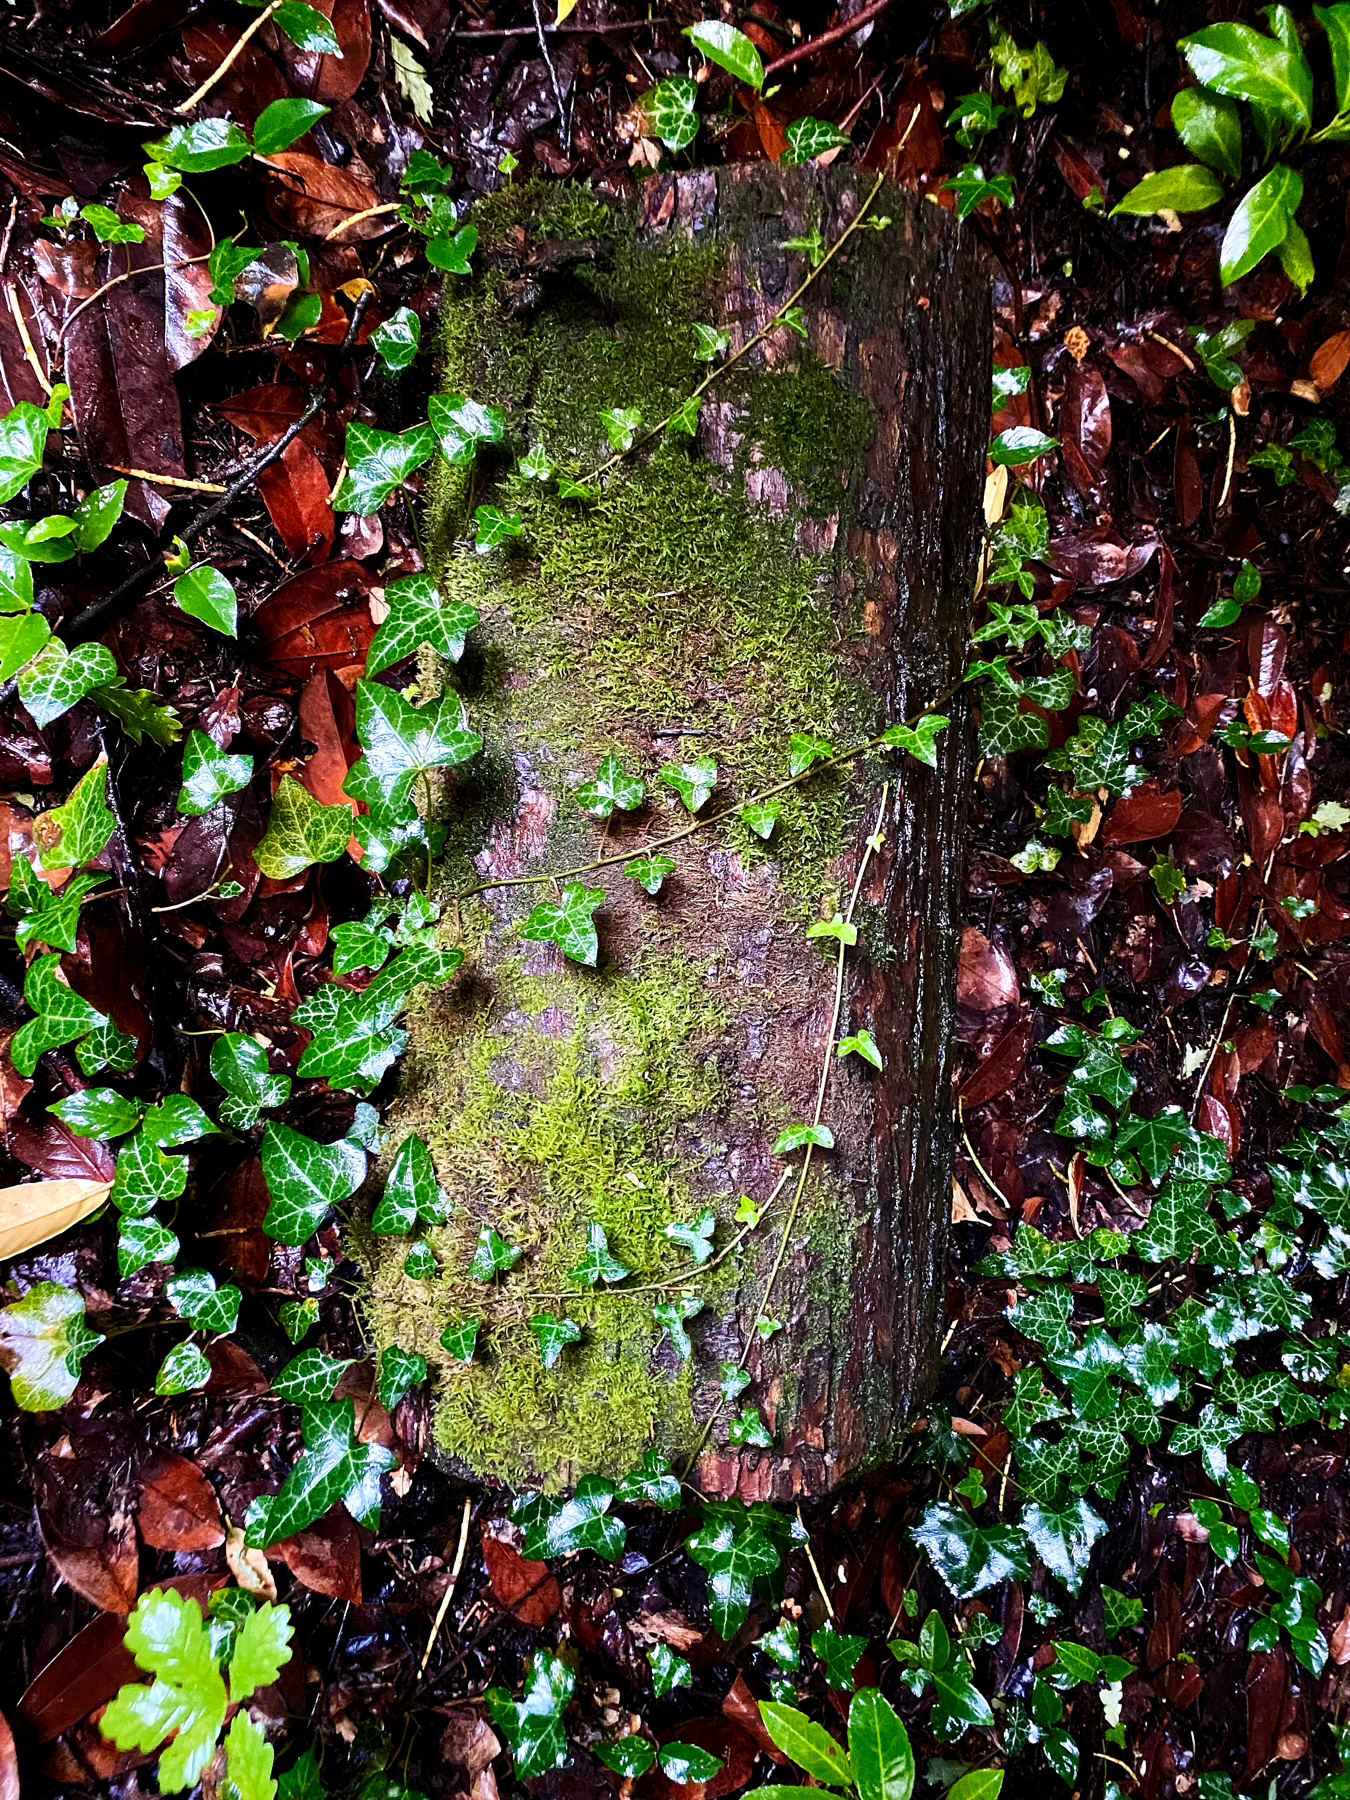 Mossy log in undergrowth with ivy starting to grow over and around it